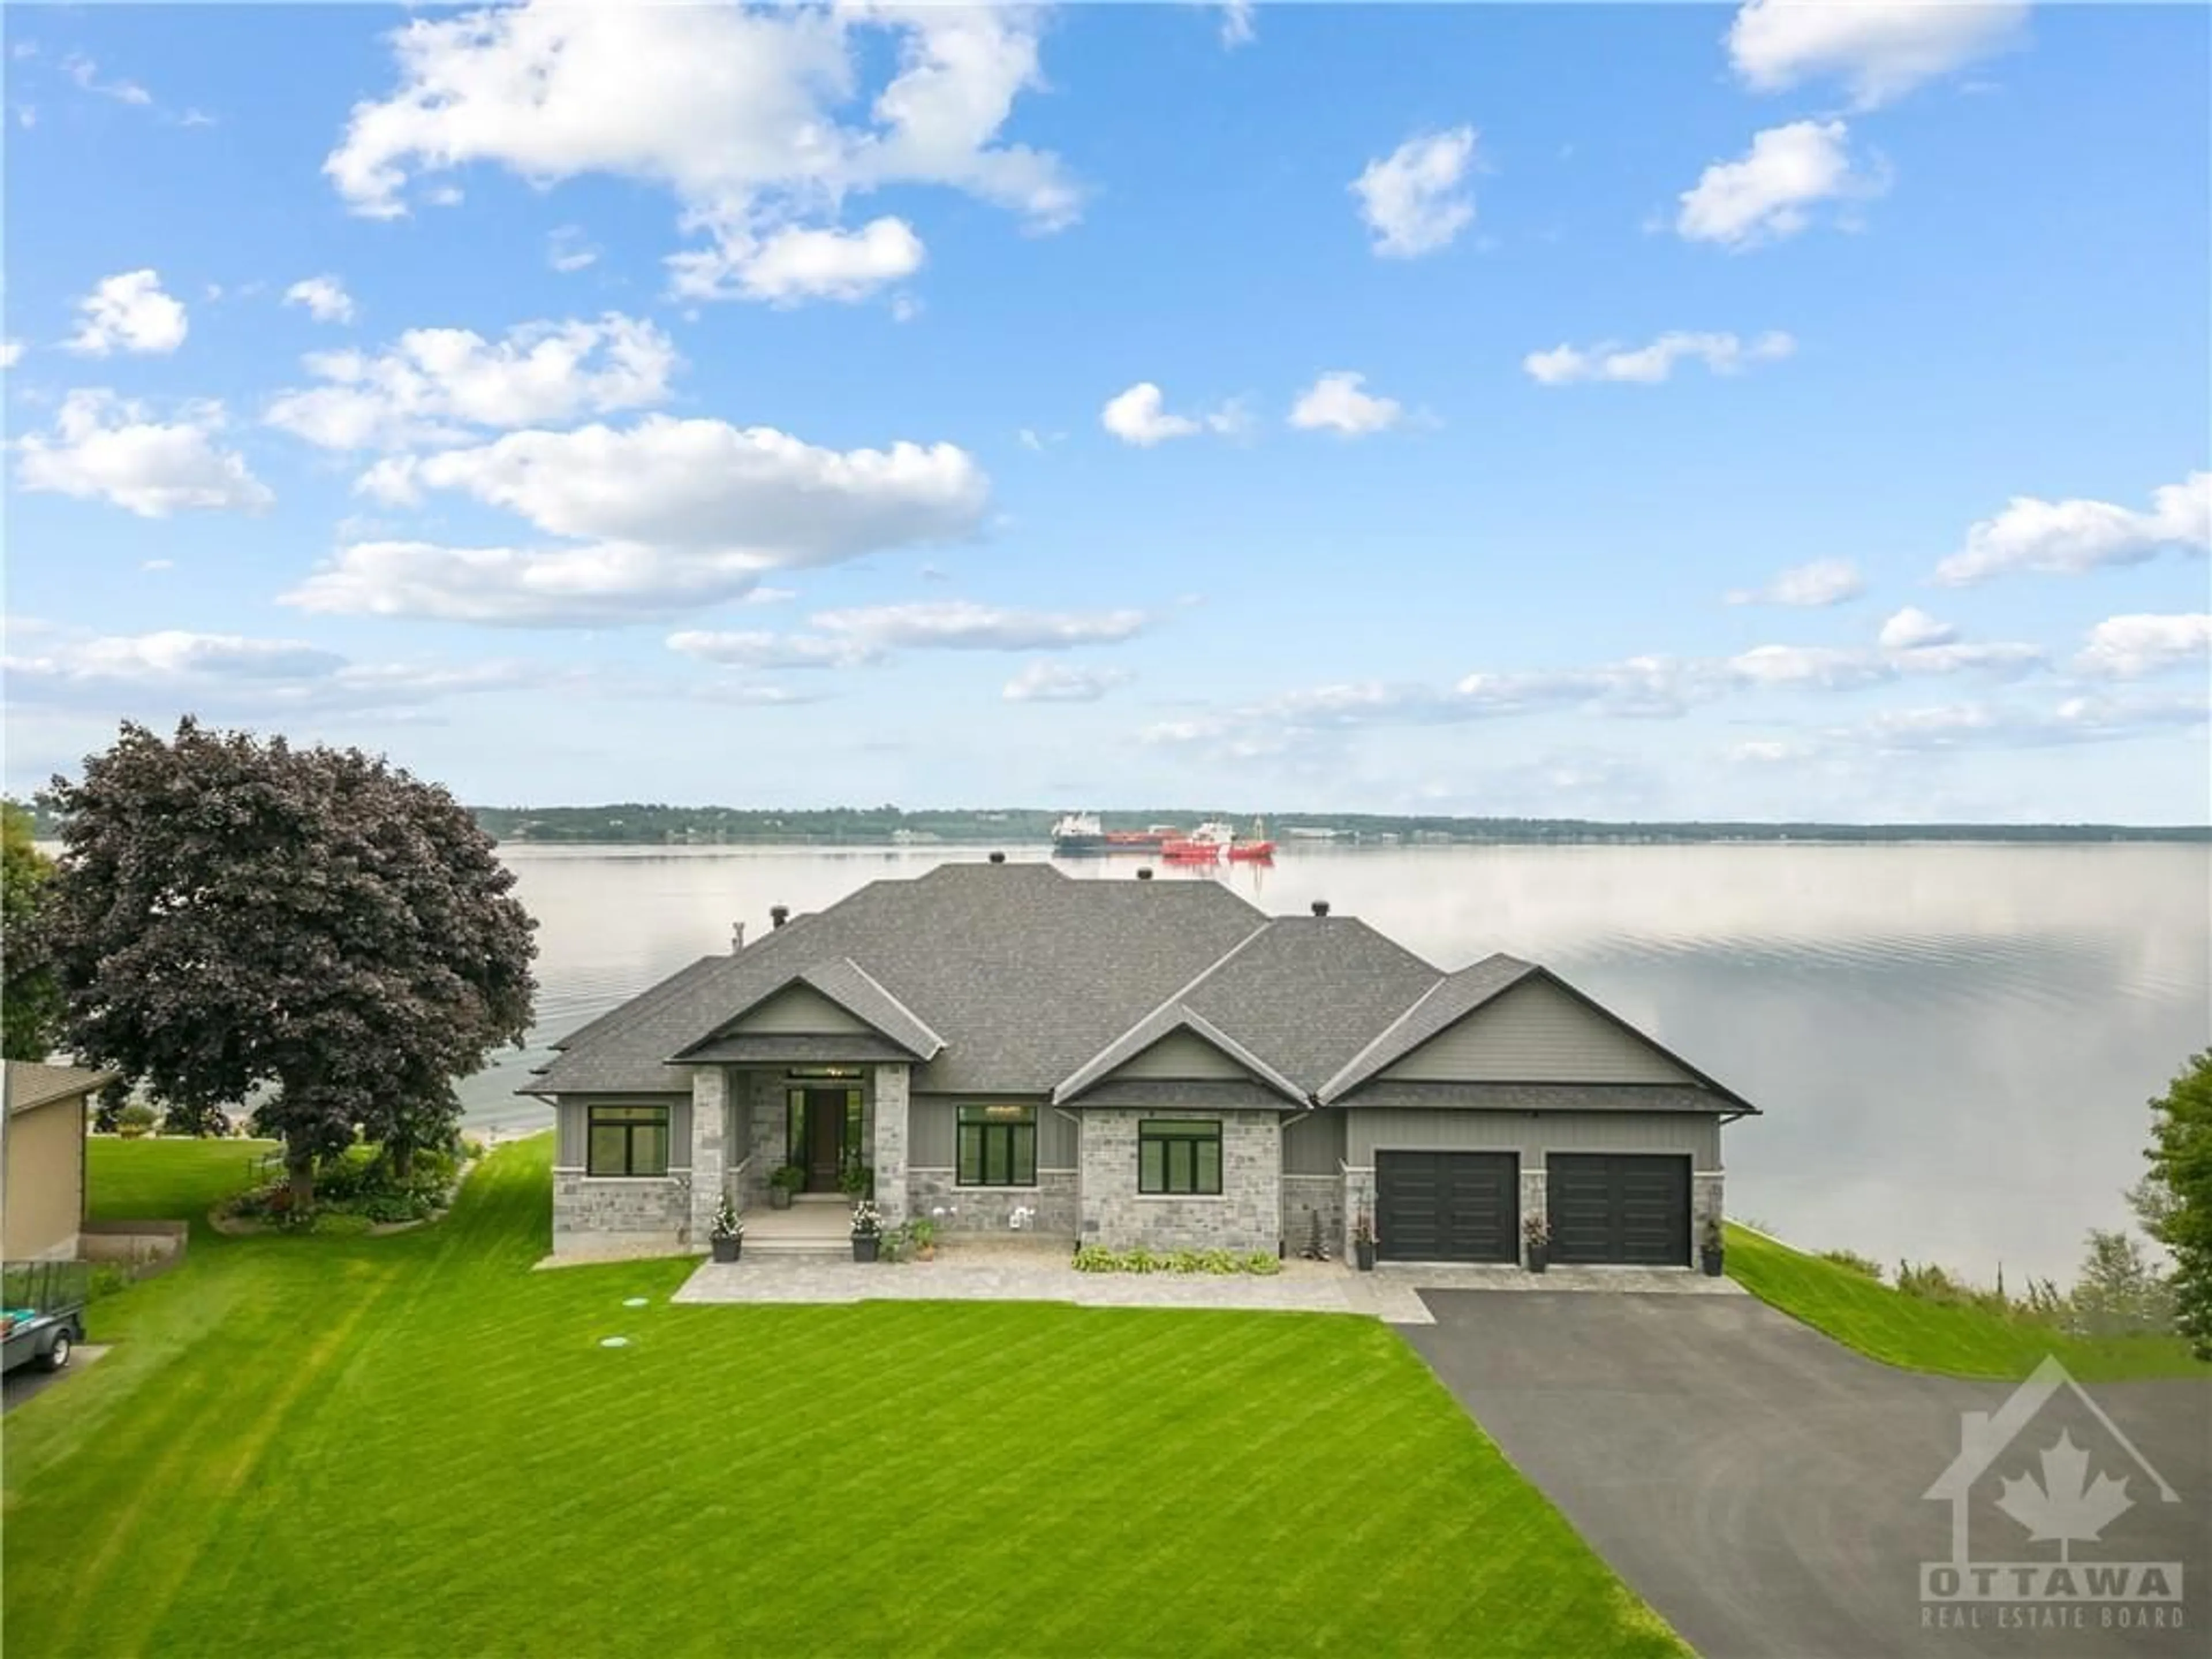 Lakeview for 1671 COUNTY ROAD 2 Rd, Prescott Ontario K0E 1T0